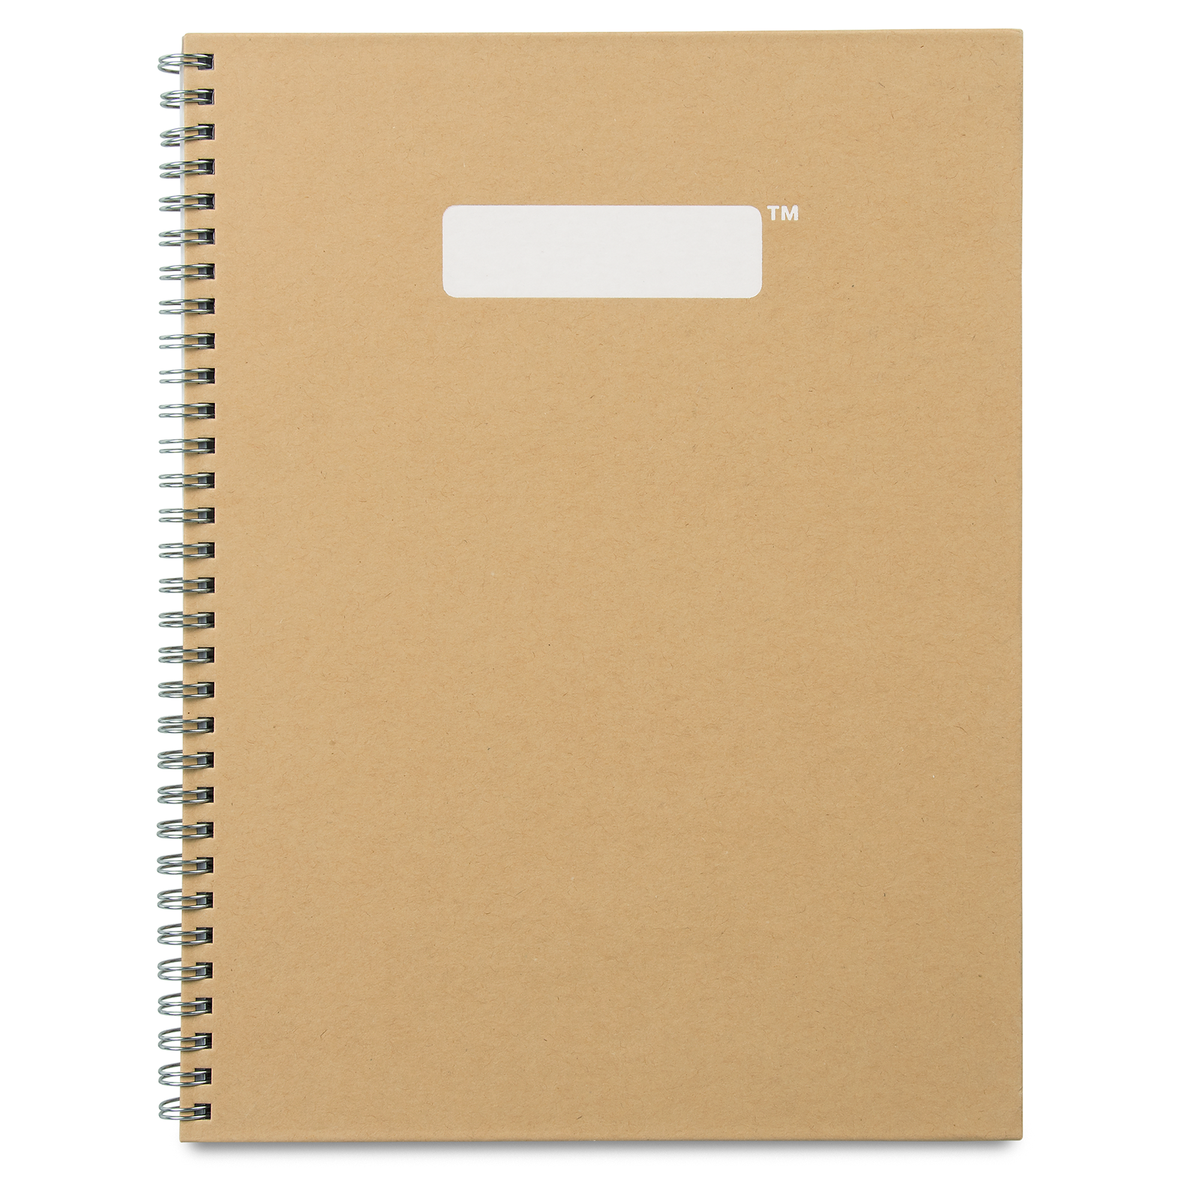 Hardcover spiral notebook.  FSC certified paper. College ruled. 80 perforated pages. Brandless. Craft Cover.